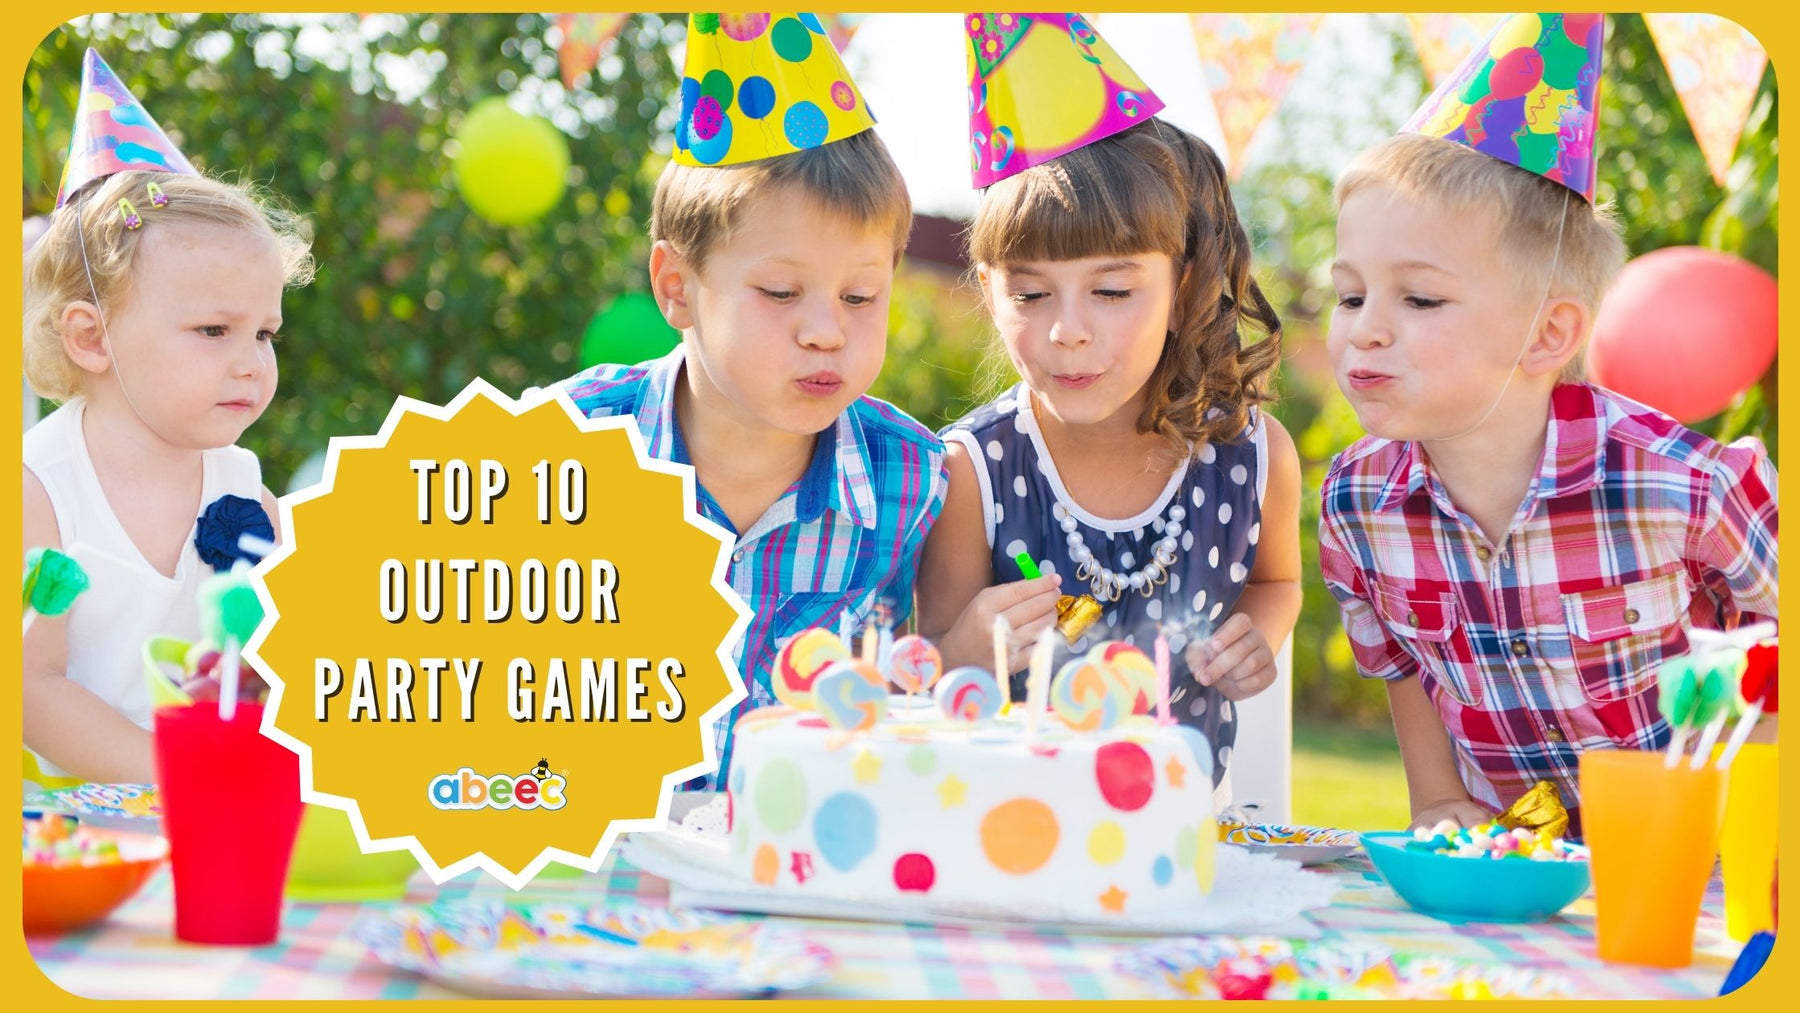 Top 10 party games and activities